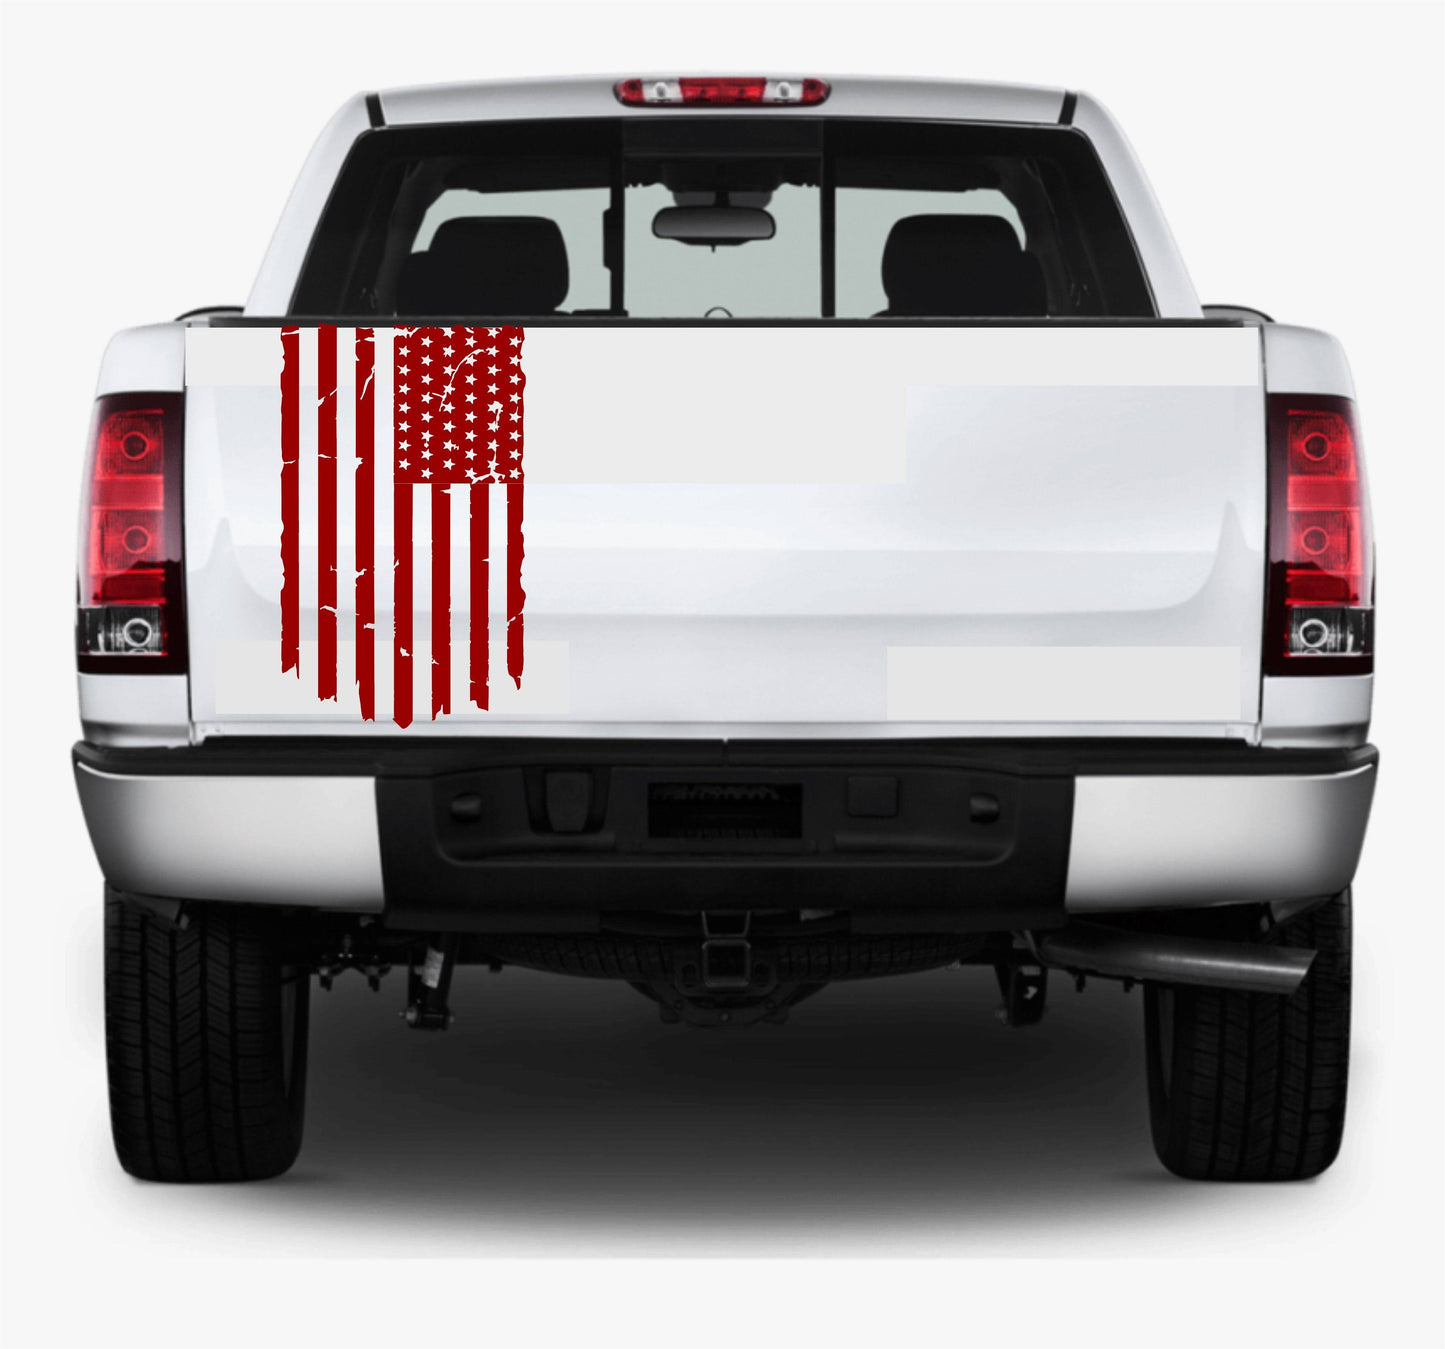 Copy of Distressed American Flag Decal Stickers | Patriotic Vinyl Decal for Any Trucks, SUV's, Vans, Tailgates, Bumpers...